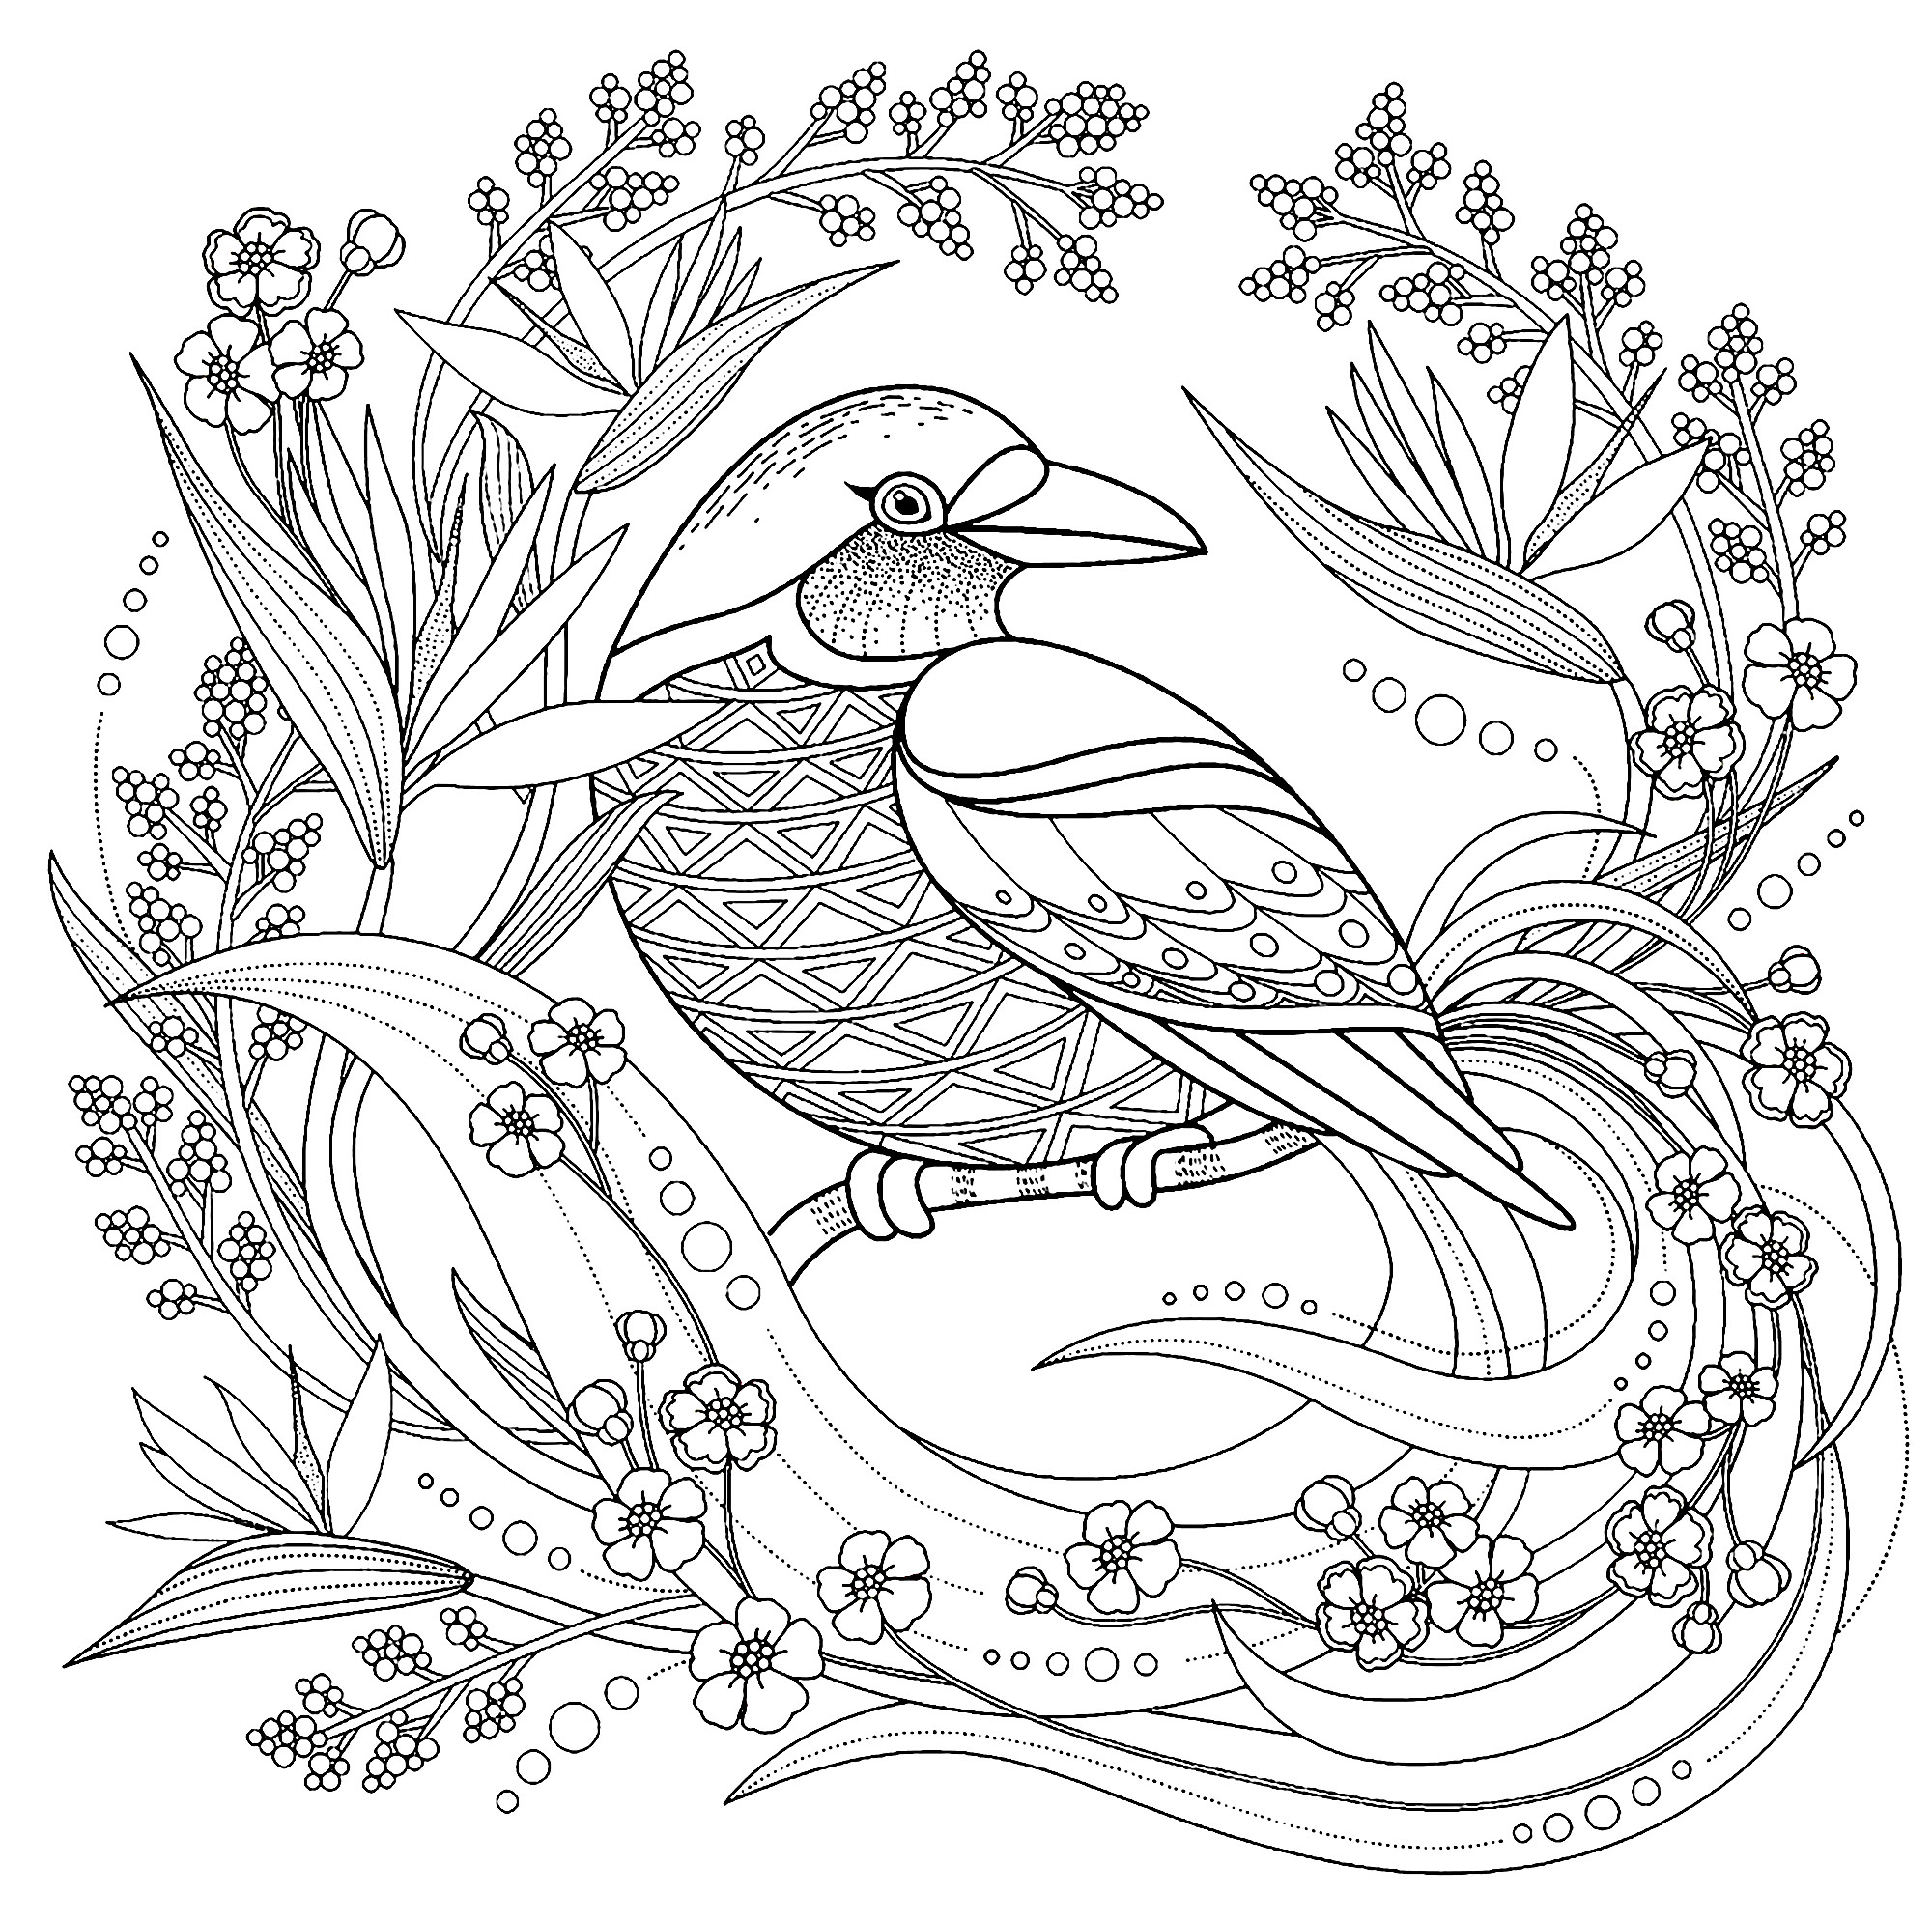 Bird with floral elements - Birds Adult Coloring Pages